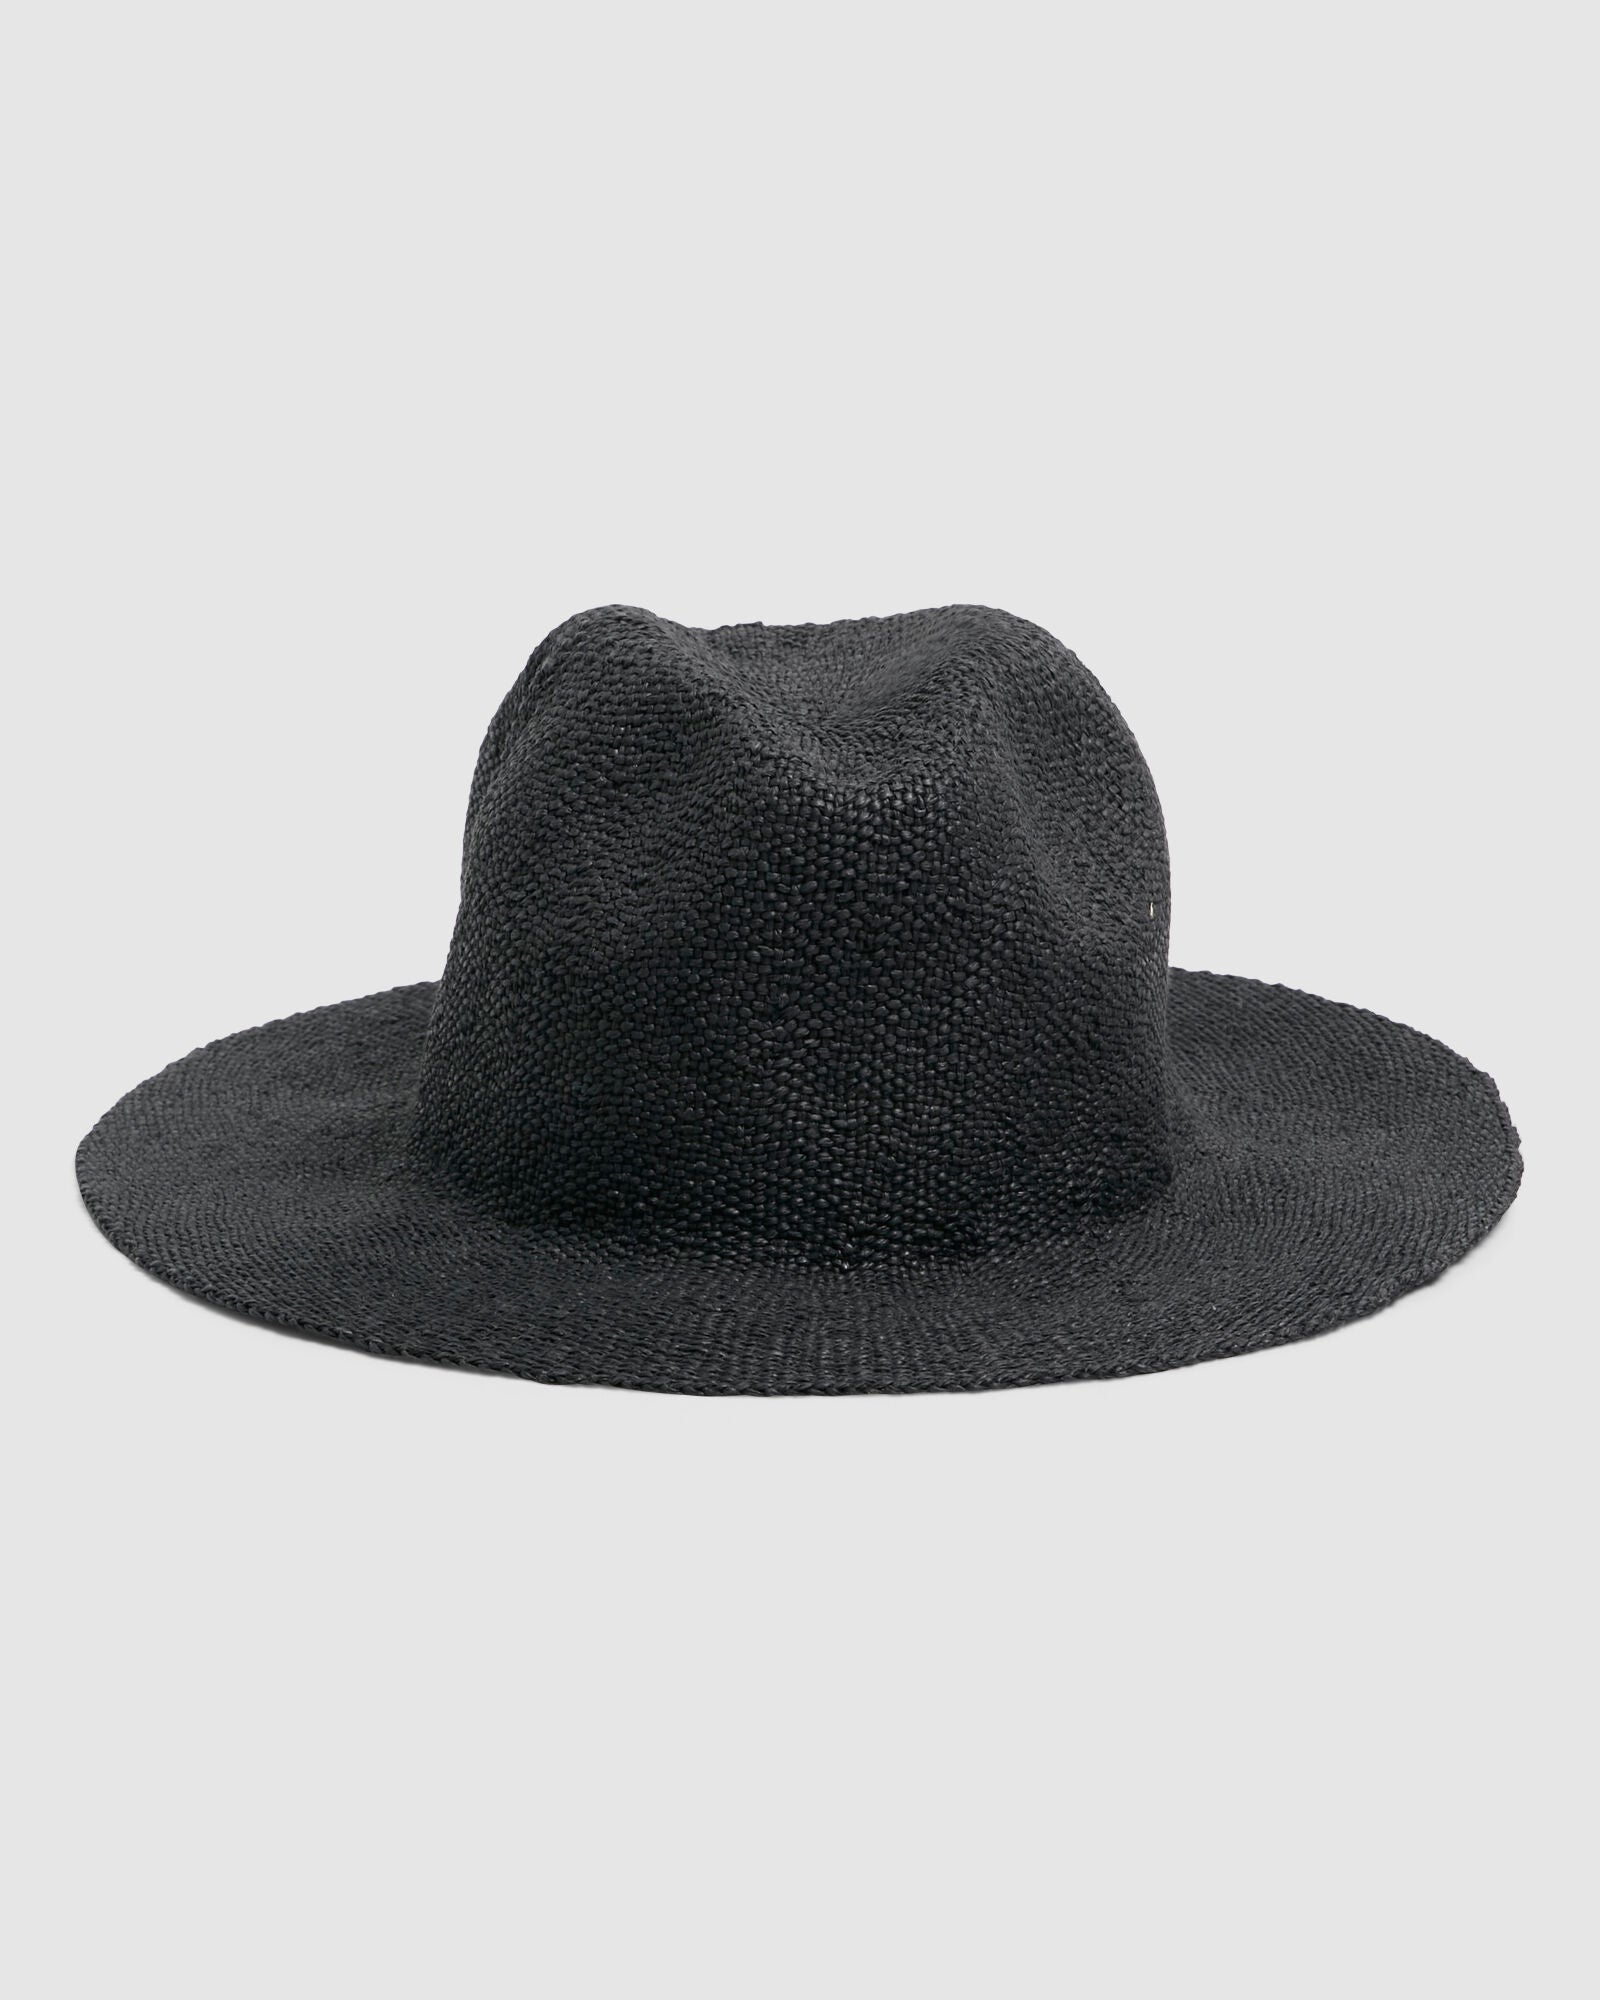 Rusty Dean Crushable Straw Hat CHOCOLATE